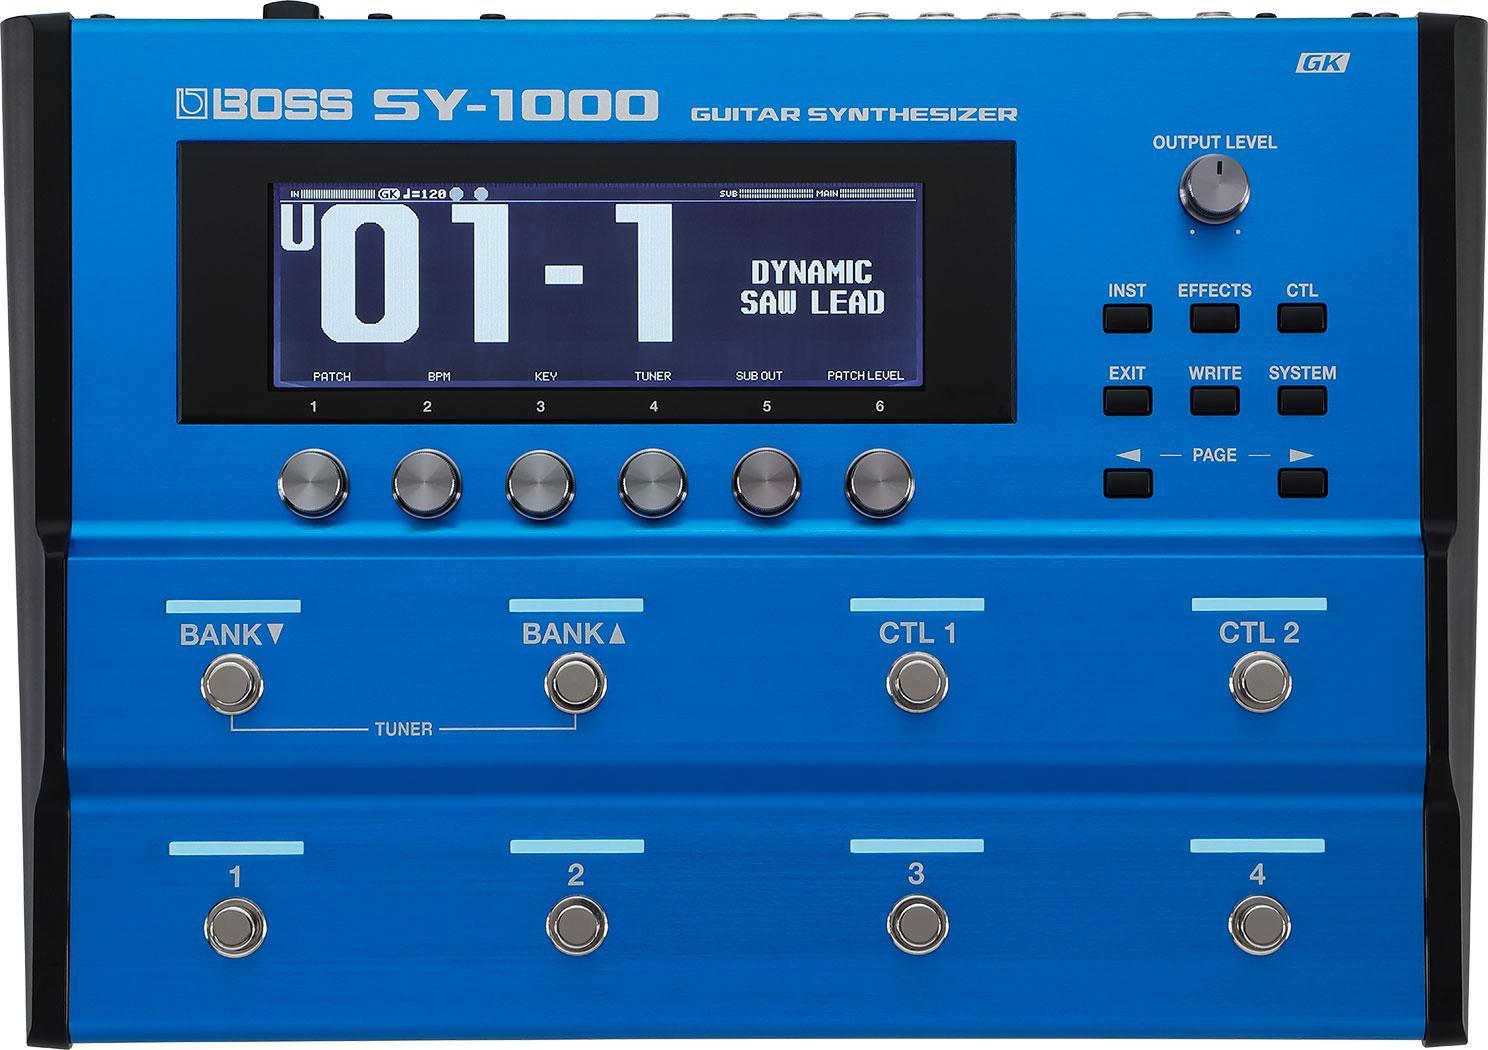 Guitar synthesizer Boss SY-1000 Guitar Synthesizer